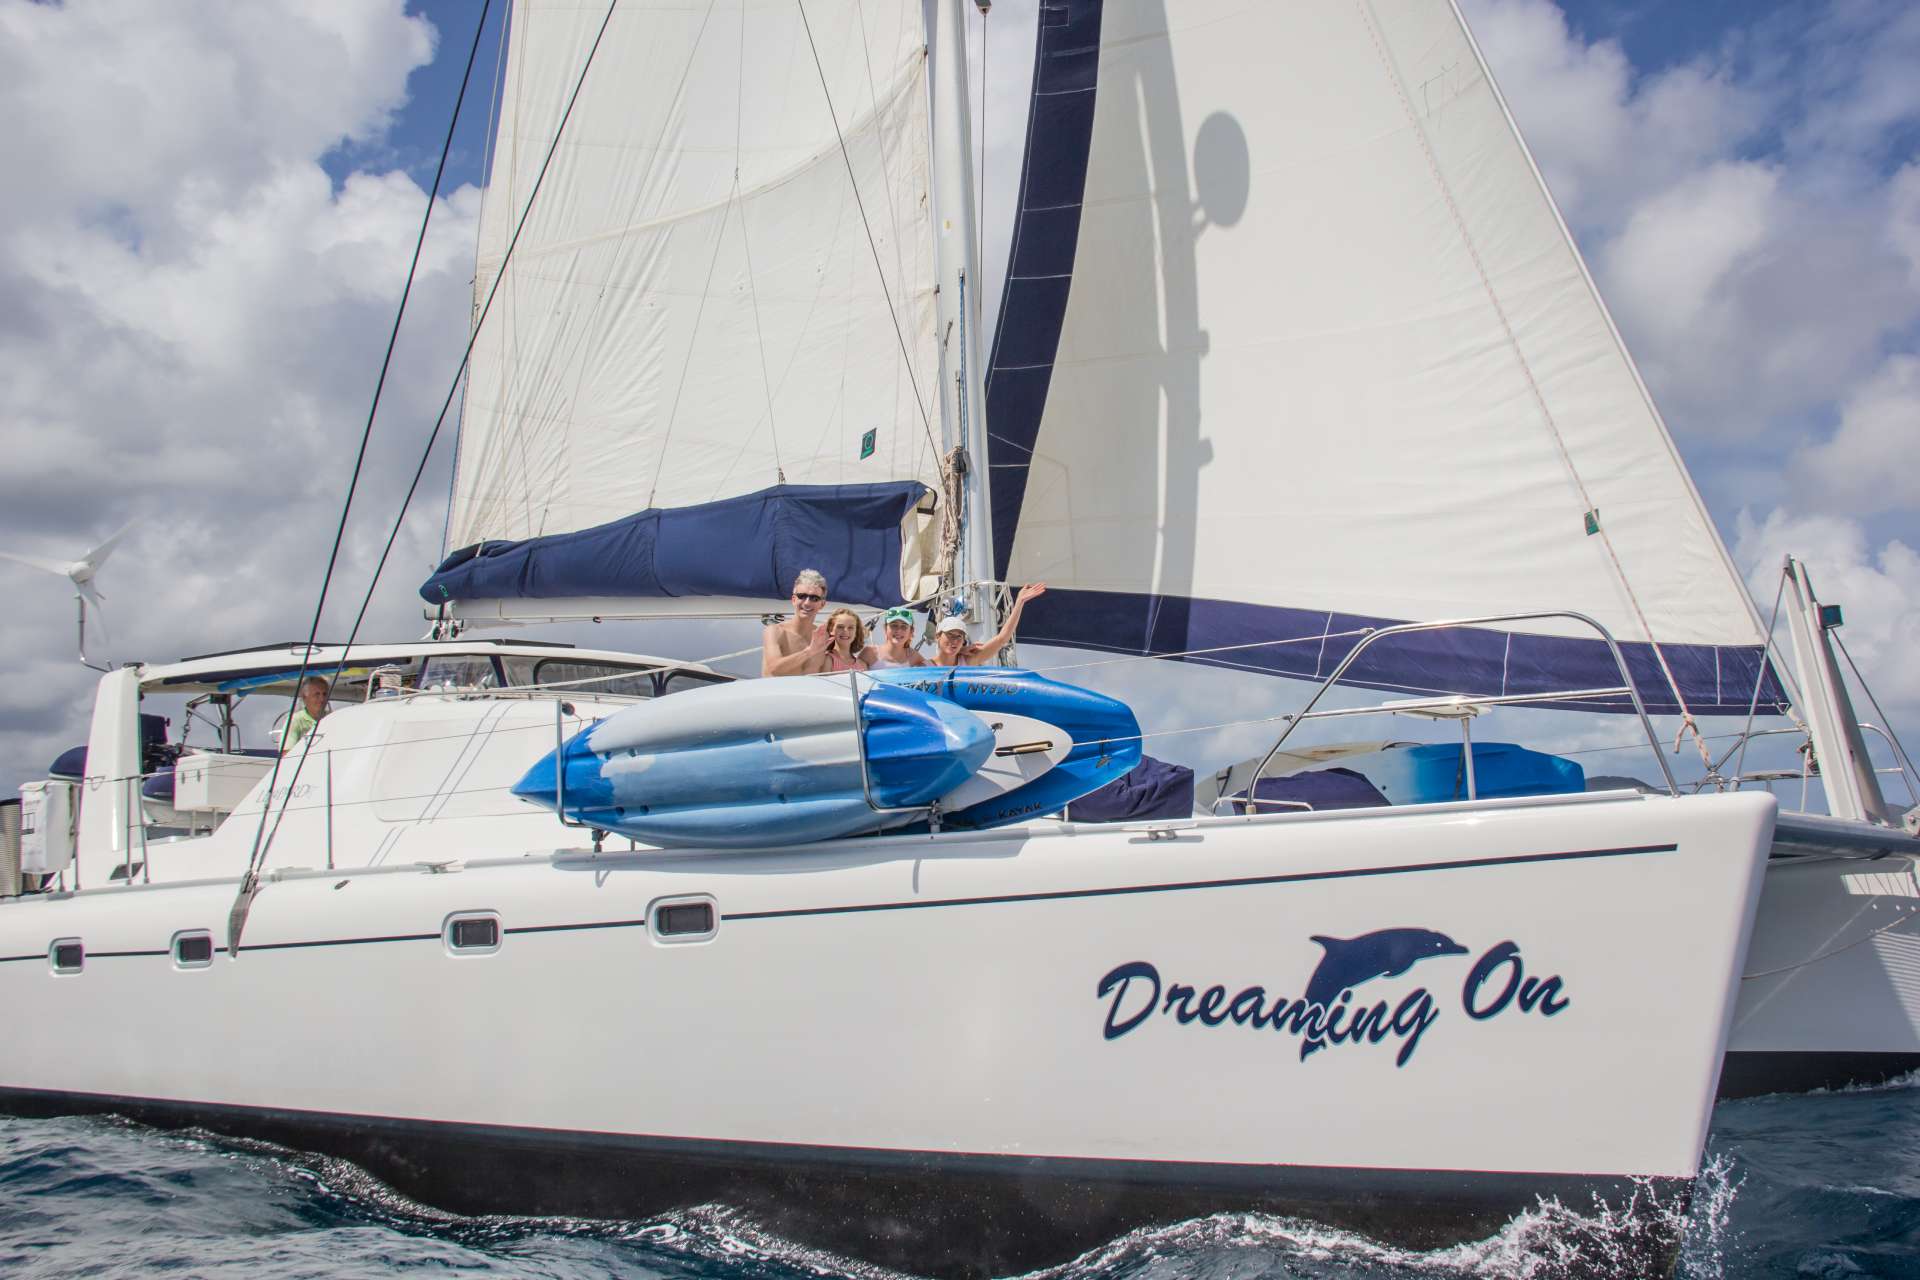 dreaming on - Catamaran charter Ibiza & Boat hire in Central america, Belize 2